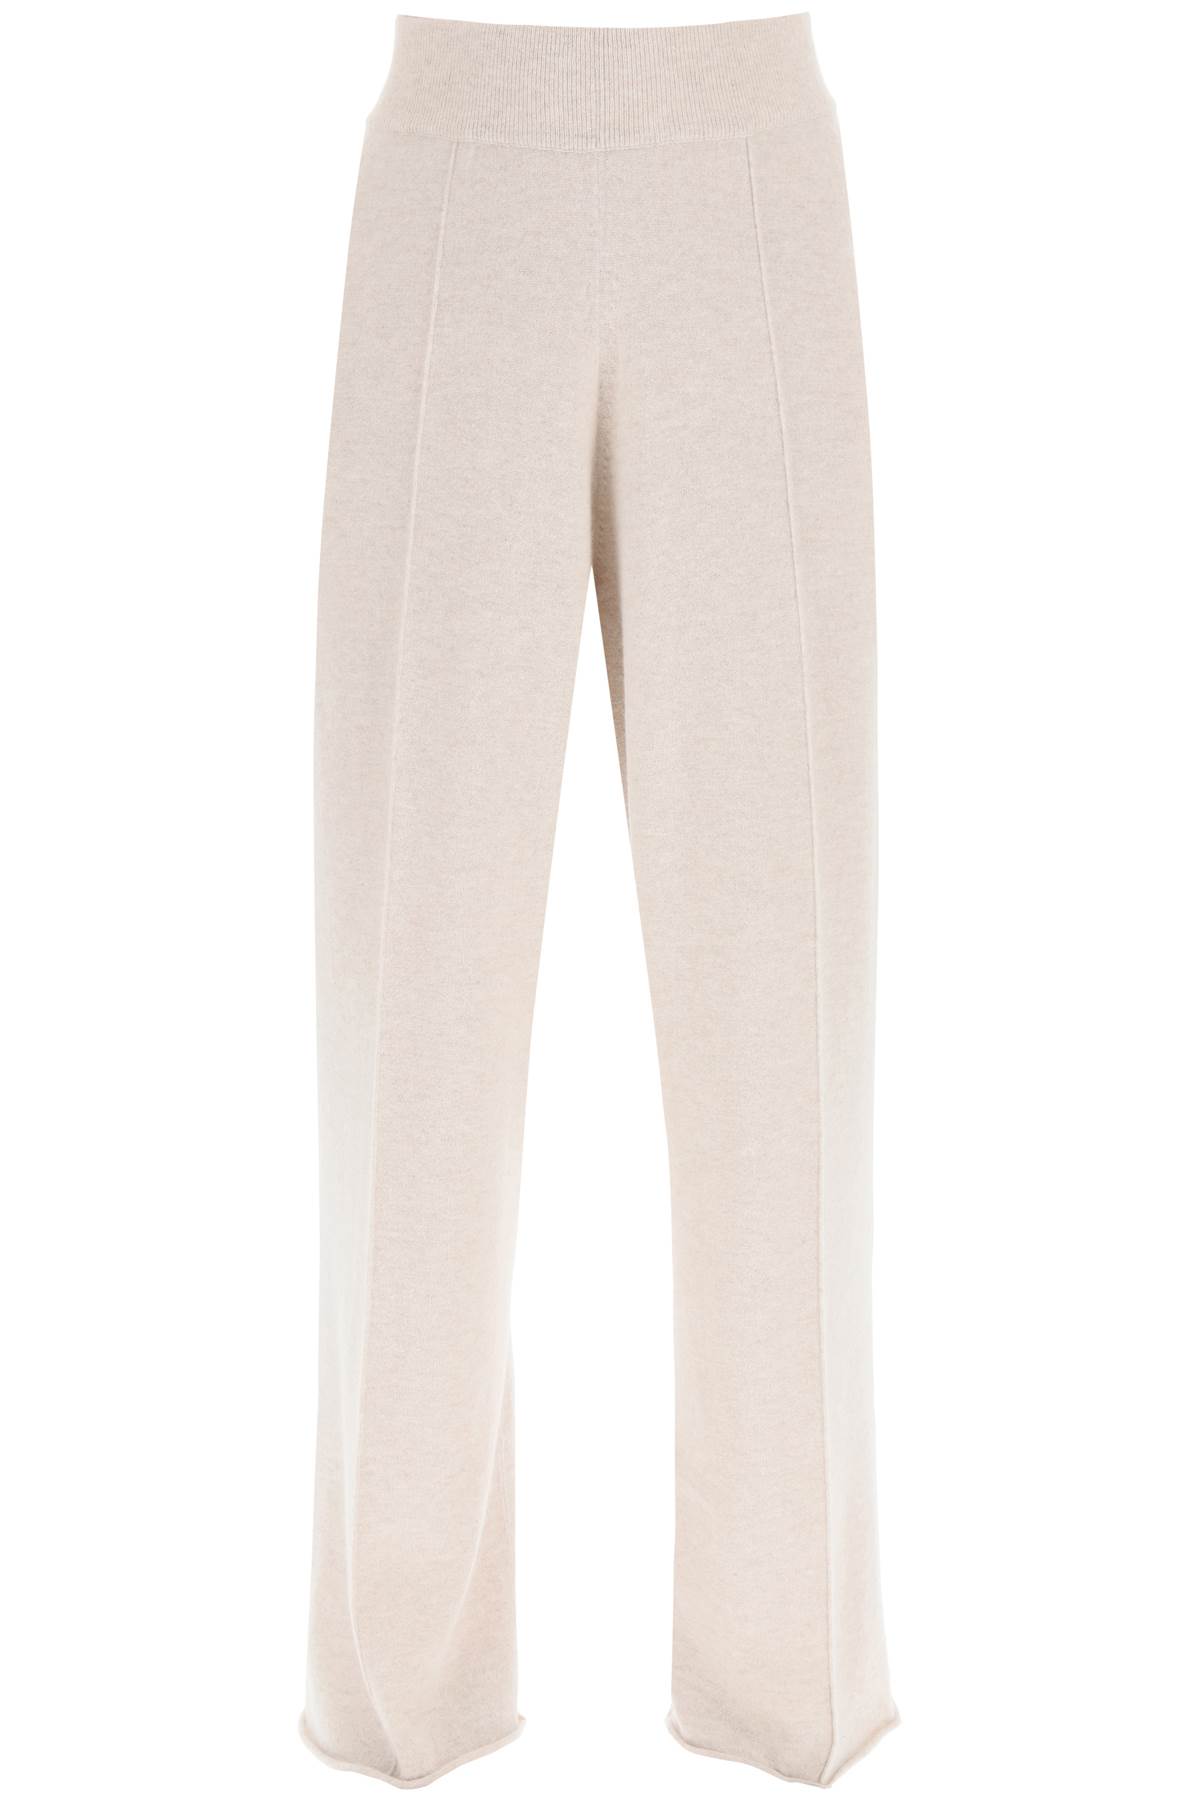 ALLUDE CASHMERE PANTS